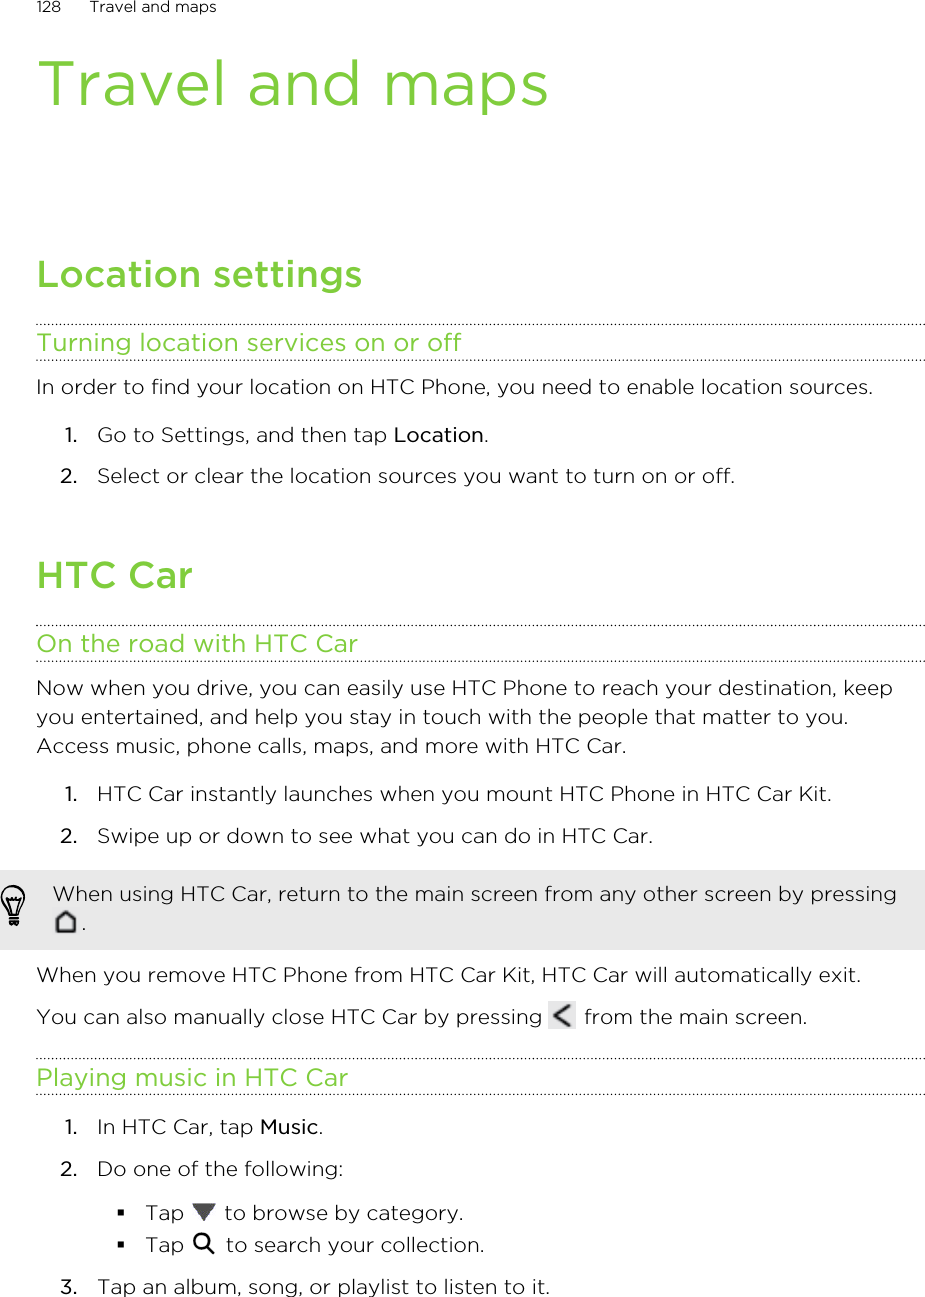 Travel and mapsLocation settingsTurning location services on or offIn order to find your location on HTC Phone, you need to enable location sources.1. Go to Settings, and then tap Location.2. Select or clear the location sources you want to turn on or off.HTC CarOn the road with HTC CarNow when you drive, you can easily use HTC Phone to reach your destination, keepyou entertained, and help you stay in touch with the people that matter to you.Access music, phone calls, maps, and more with HTC Car.1. HTC Car instantly launches when you mount HTC Phone in HTC Car Kit.2. Swipe up or down to see what you can do in HTC Car.When using HTC Car, return to the main screen from any other screen by pressing.When you remove HTC Phone from HTC Car Kit, HTC Car will automatically exit.You can also manually close HTC Car by pressing   from the main screen.Playing music in HTC Car1. In HTC Car, tap Music.2. Do one of the following:§Tap   to browse by category.§Tap   to search your collection.3. Tap an album, song, or playlist to listen to it.128 Travel and mapsHTC Confidential for Certification HTC Confidential for Certification